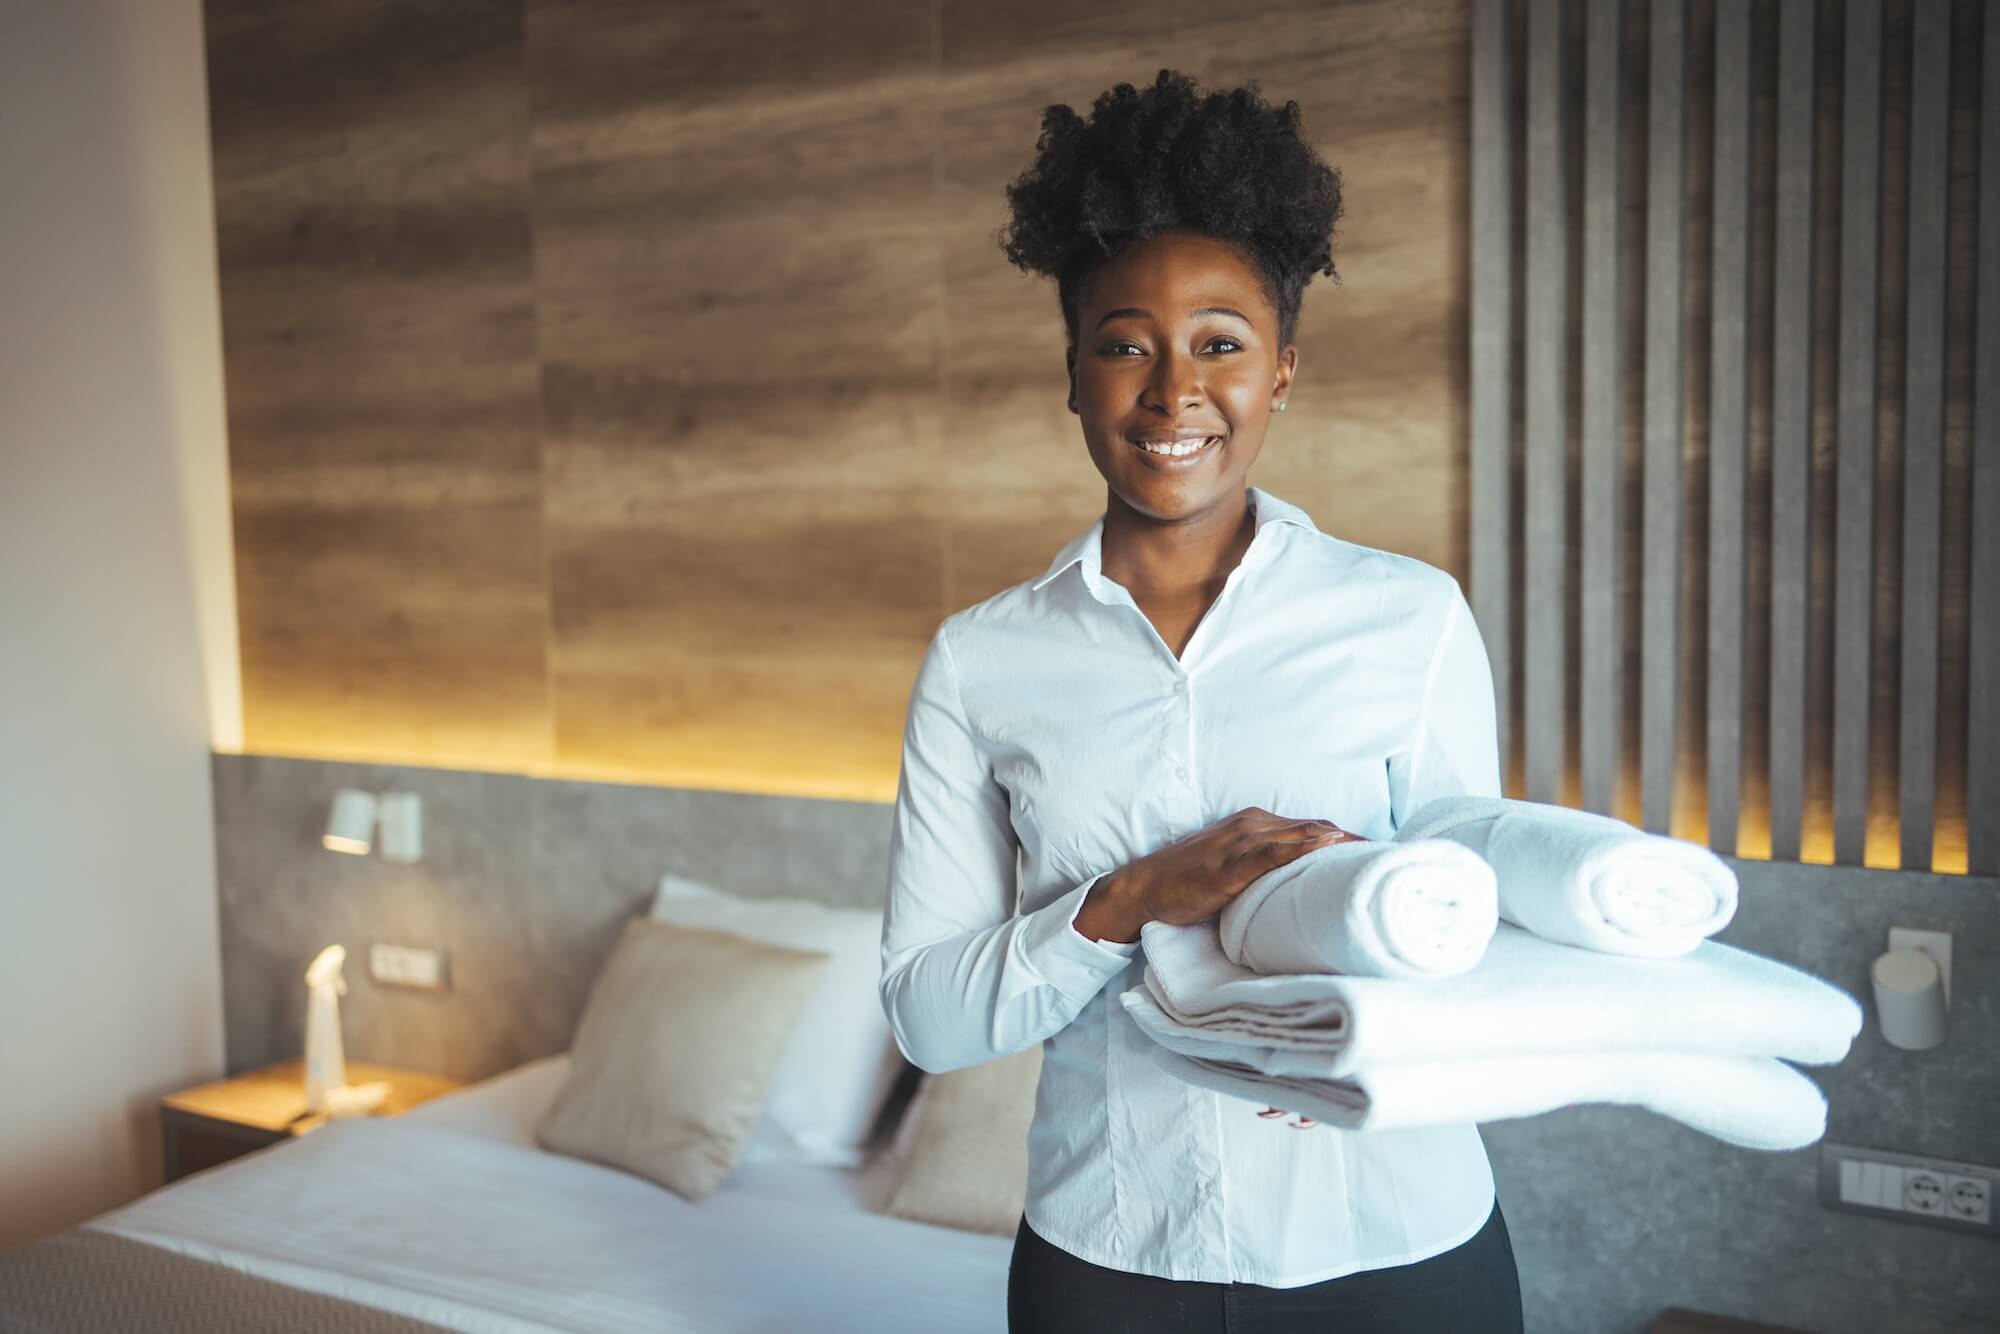 Fort Lauderdale Housekeeping services, hire a housekeeper in Fort Lauderdale, housekeeper jobs in Fort Lauderdale